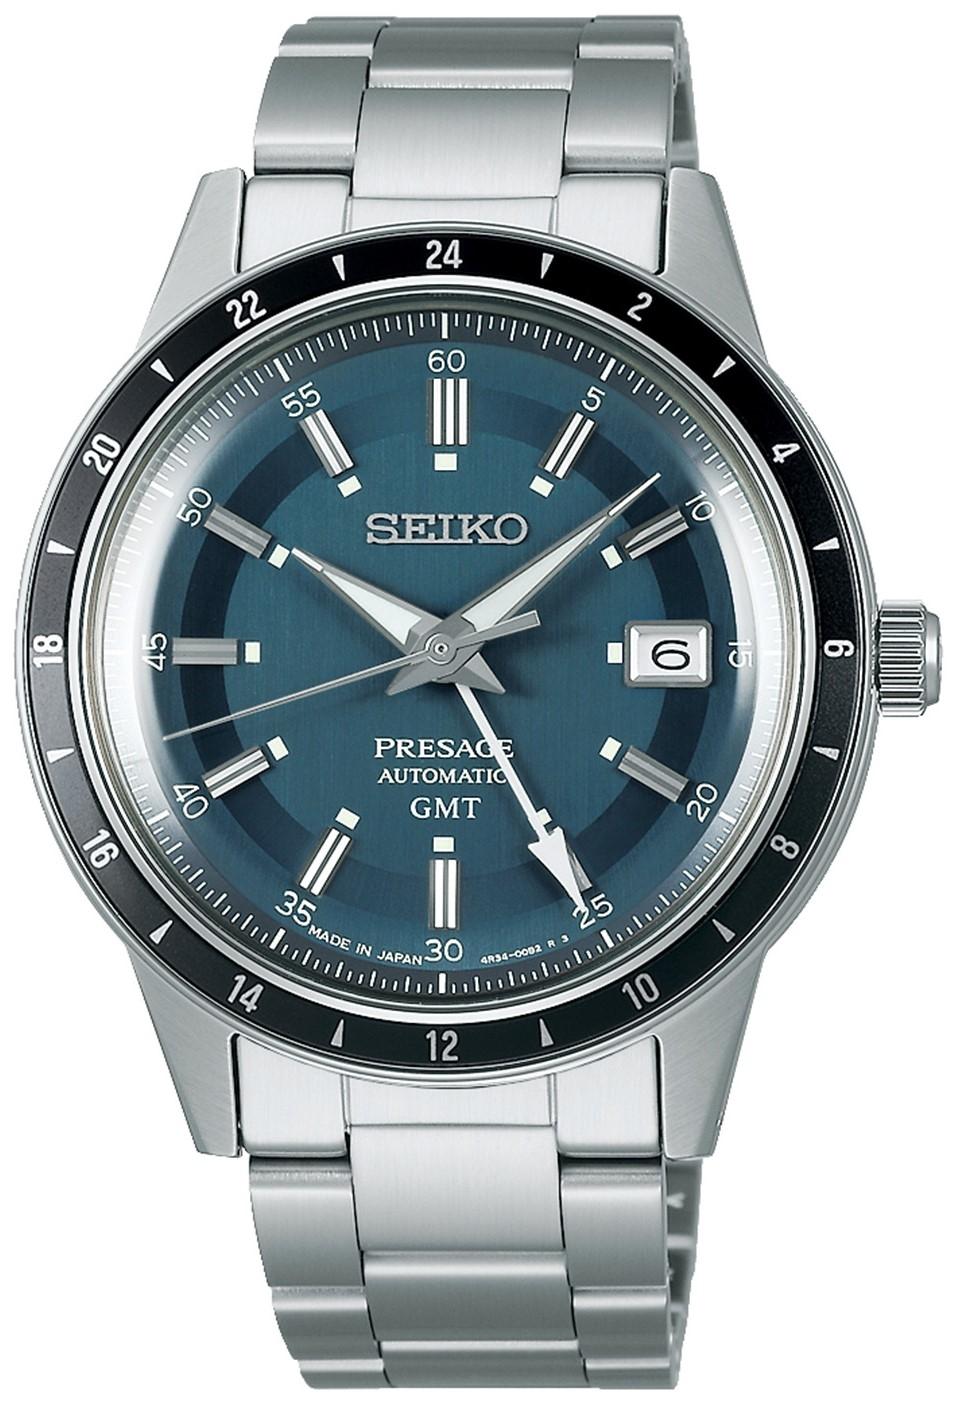 seiko presage petrol blue style 60s road trip ssk009j1 silver case with stainless steel bracelet image1 1